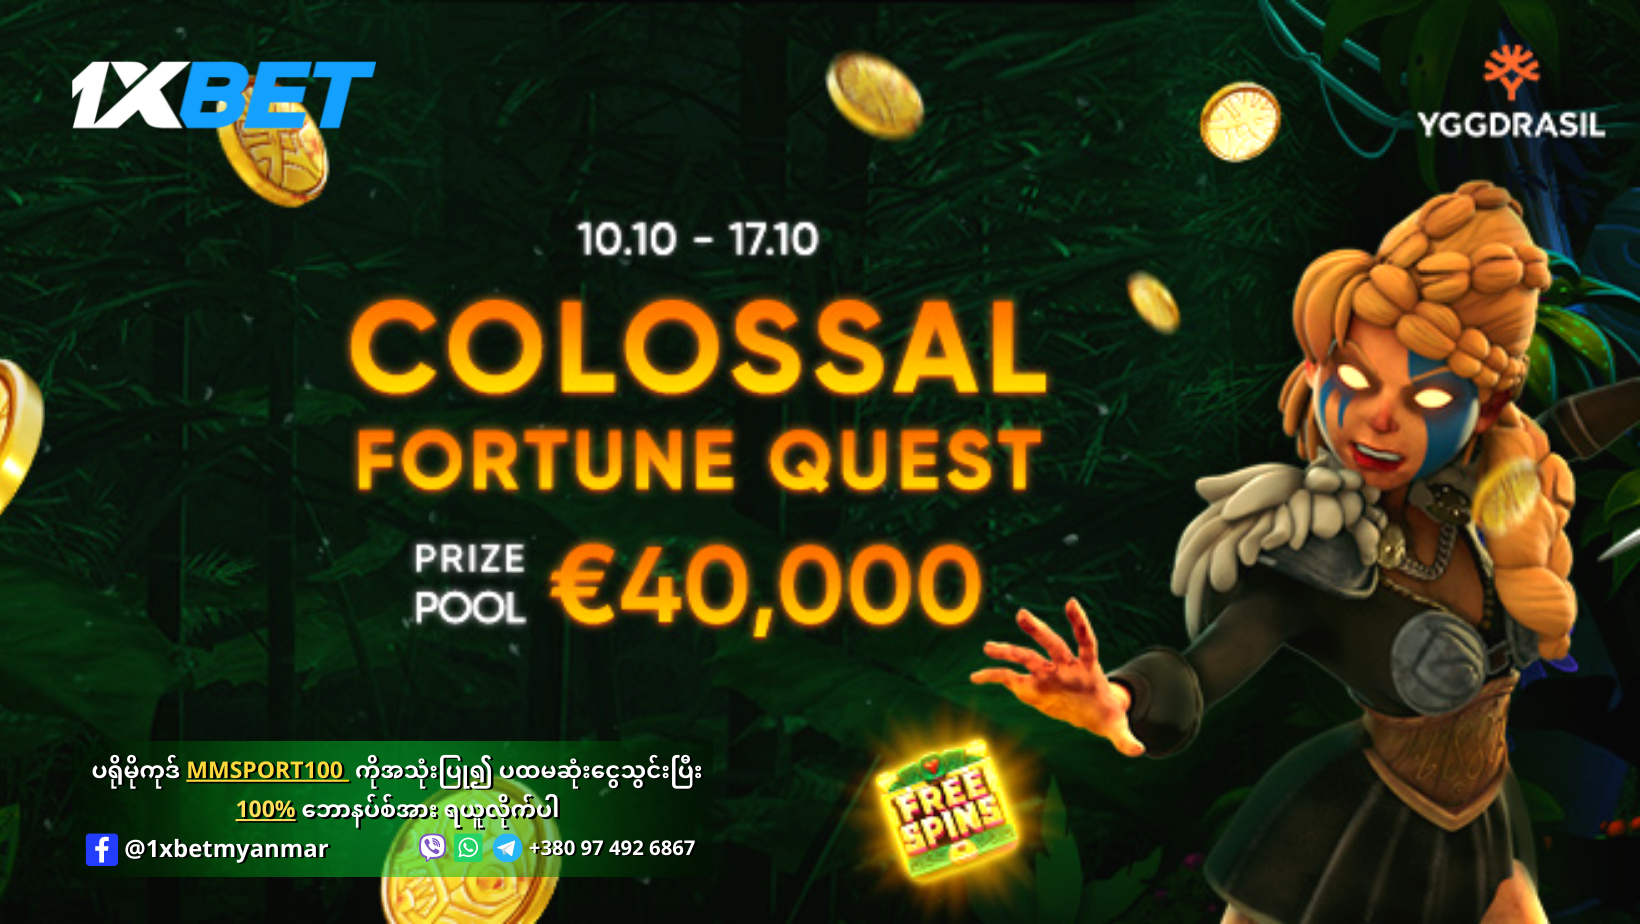 Colossal Fortune Quest Promotion